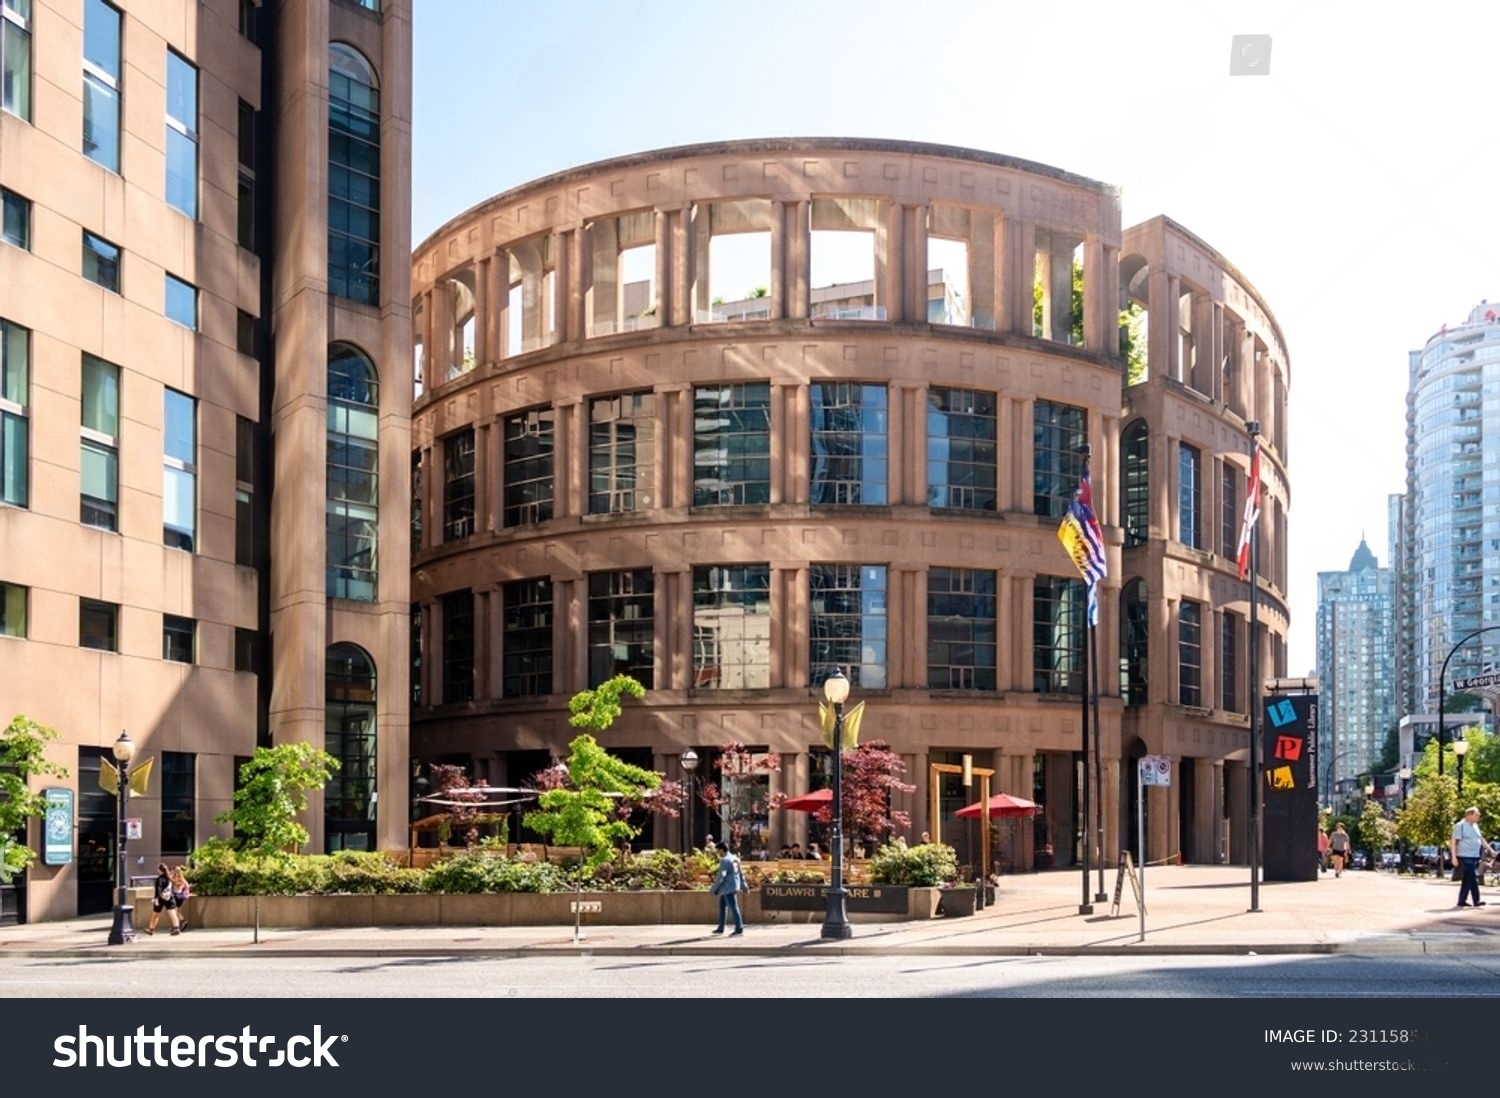 Check out Vancouver Public Library’s Cool Architecture